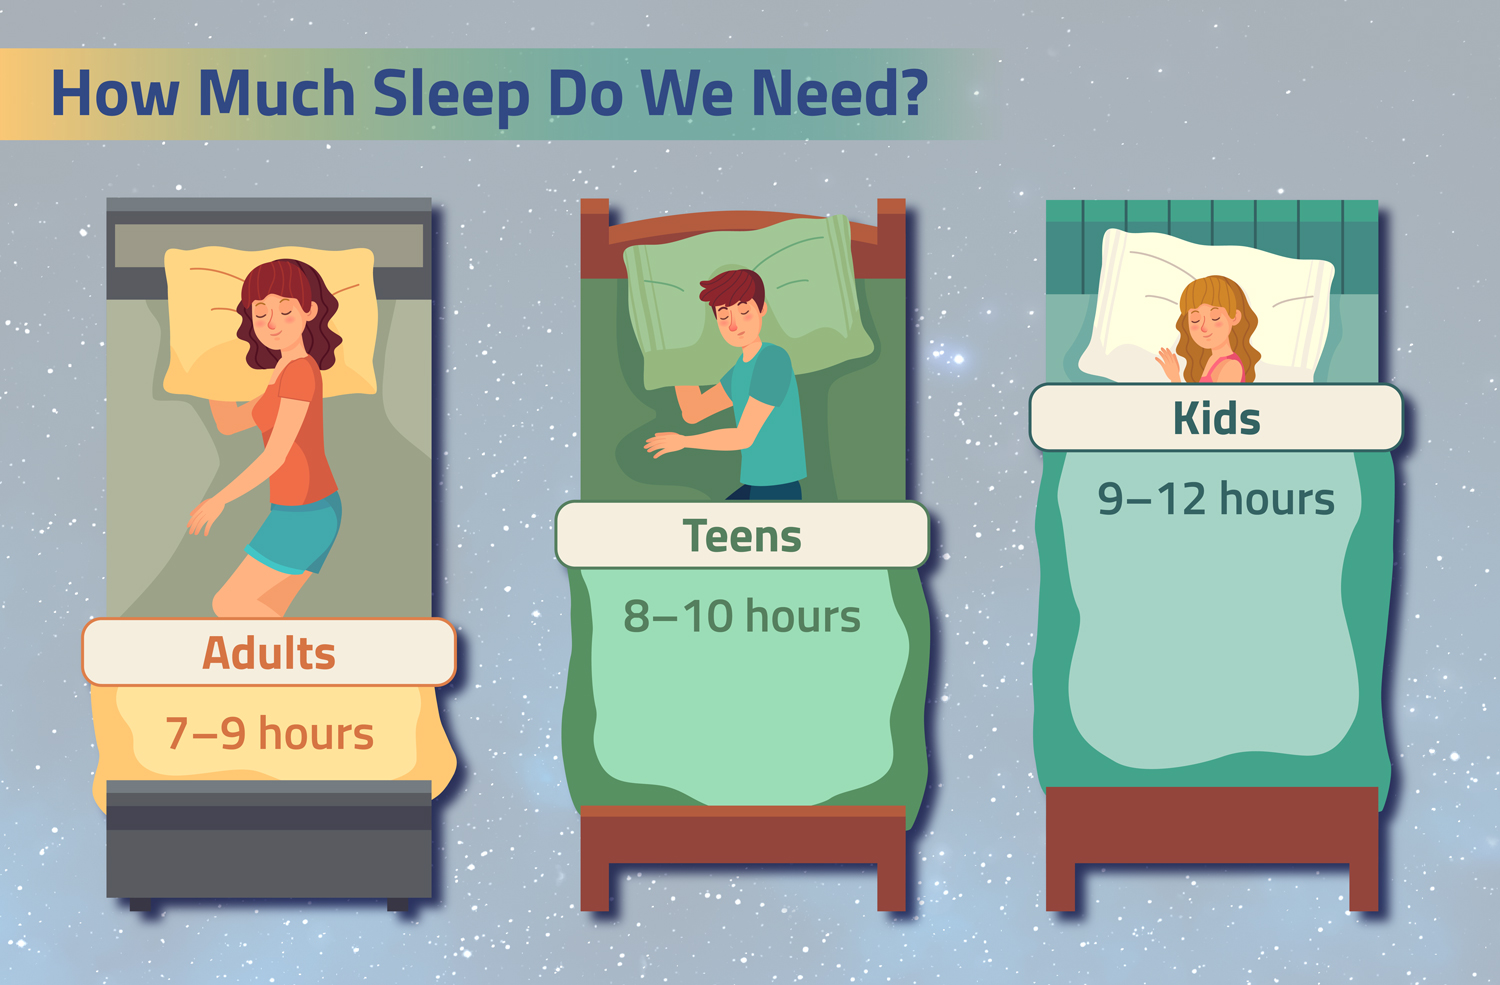 An adult, a teen, and a child sleep in side by side beds showing how much sleep each needs per night.